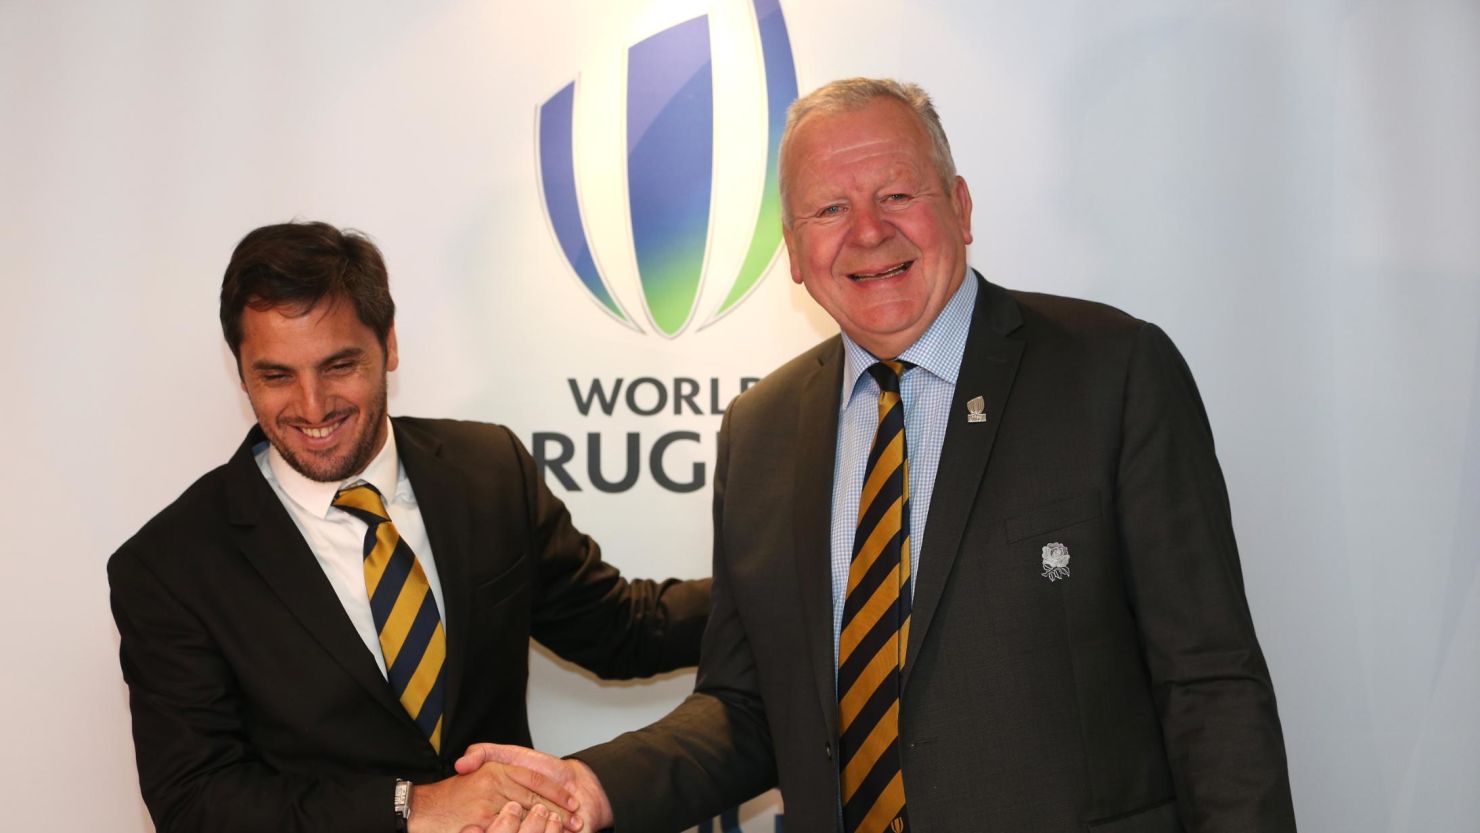 Agustin Pichot lost to Bill Beaumont in competition for World Rugby chairmanship.